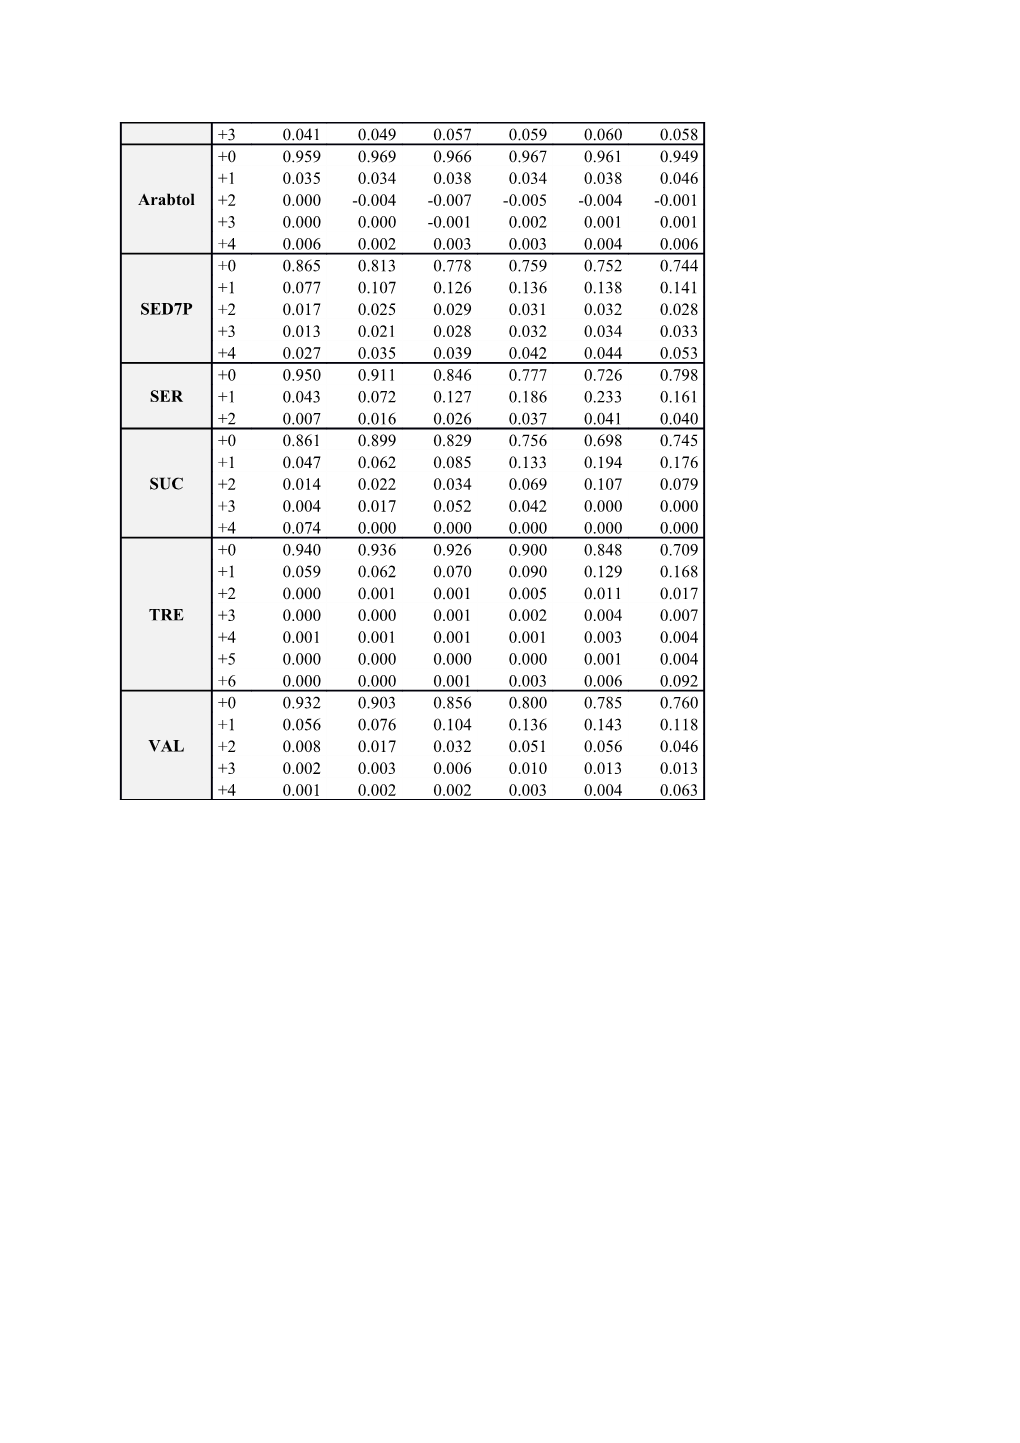 Table A6: Measured Mass Isotopomer Ratios